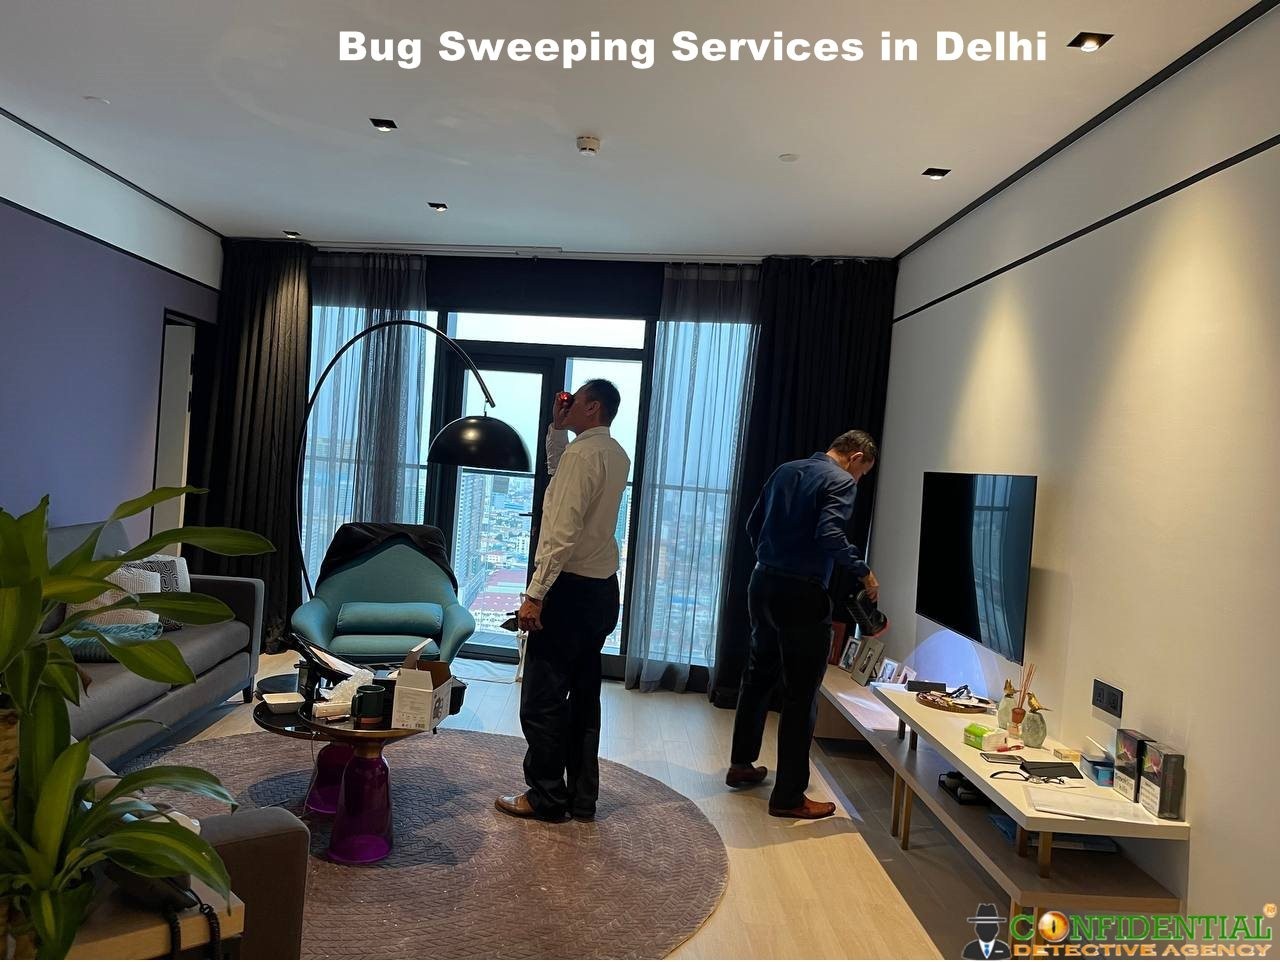 Why bug sweeping services in Delhi are necessary for Businesses?